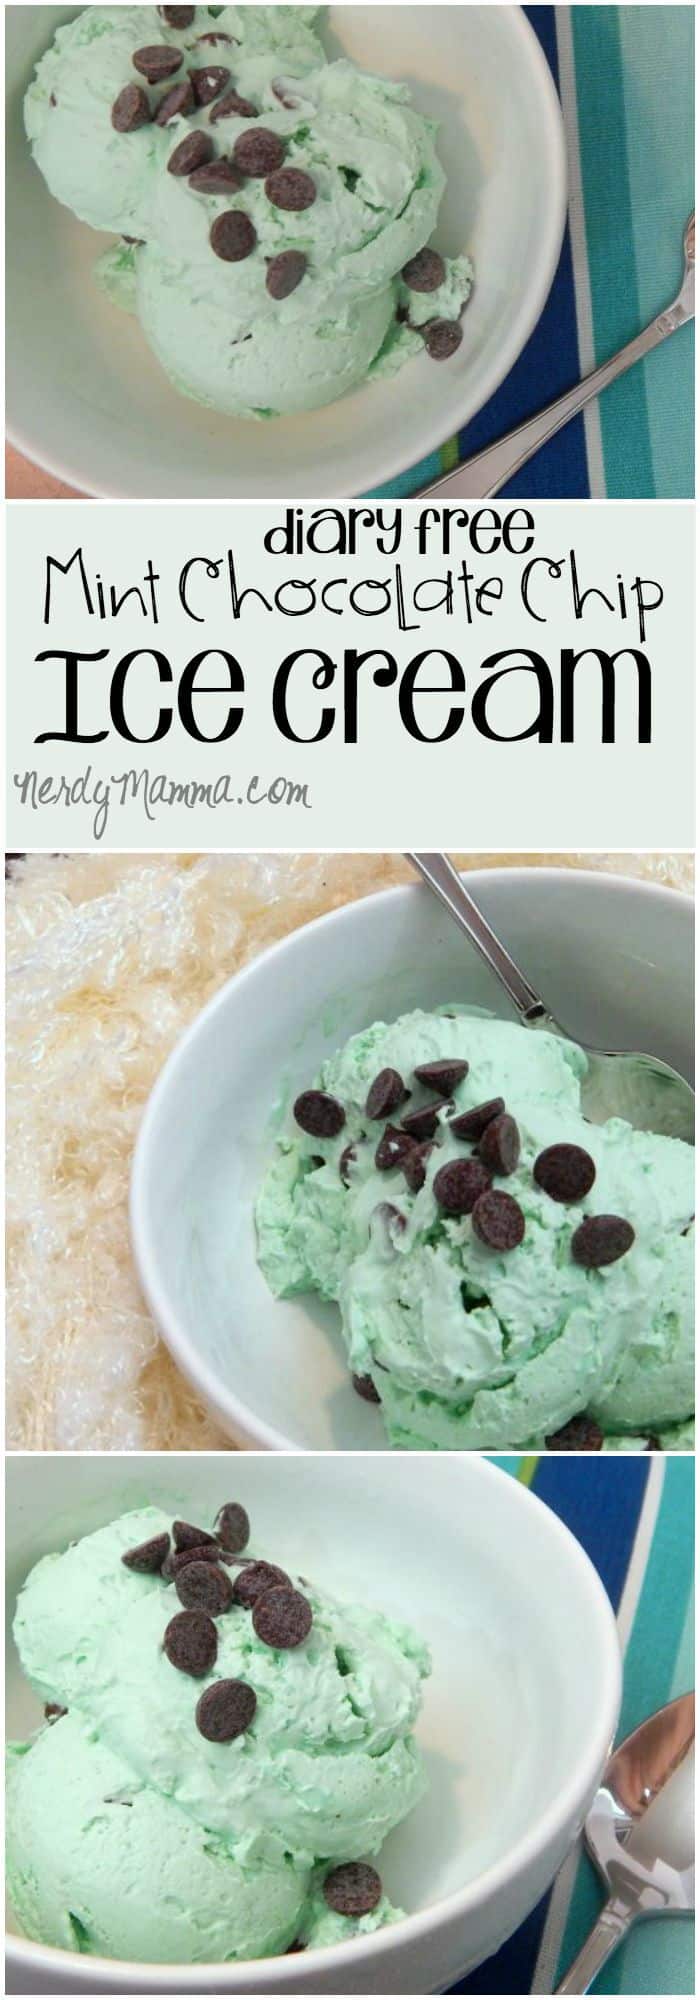 My kids love ice cream, but need dairy-free options. This mint chocolate chip ice cream is perfect for milk-haters everywhere...LOL!